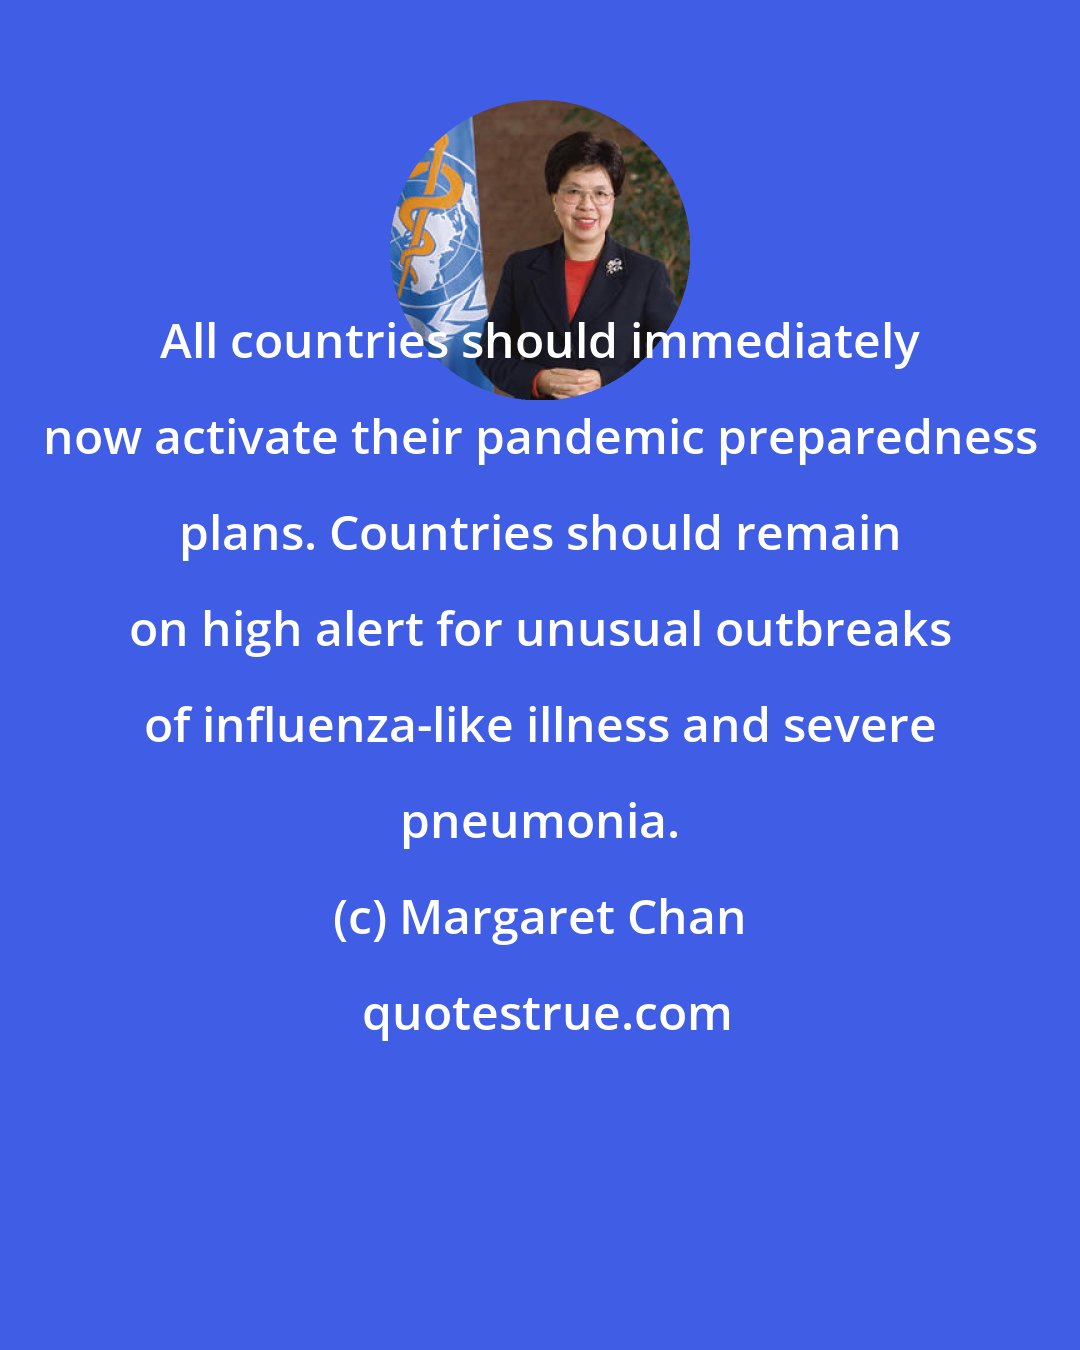 Margaret Chan: All countries should immediately now activate their pandemic preparedness plans. Countries should remain on high alert for unusual outbreaks of influenza-like illness and severe pneumonia.